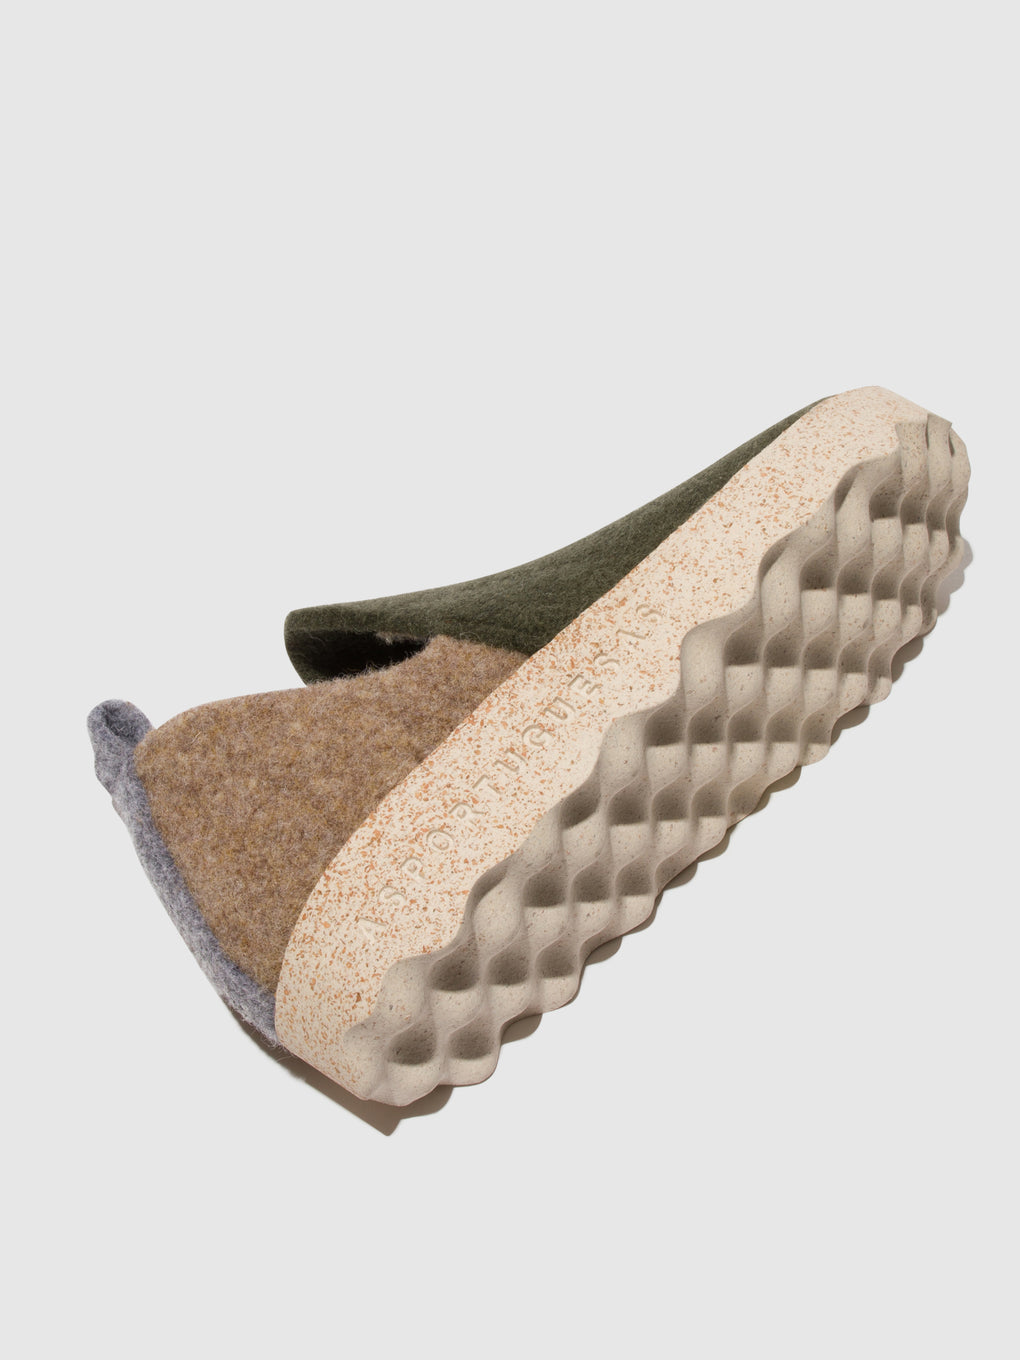 Round Toe Shoes CITY MILITARY GREEN/TAUPE